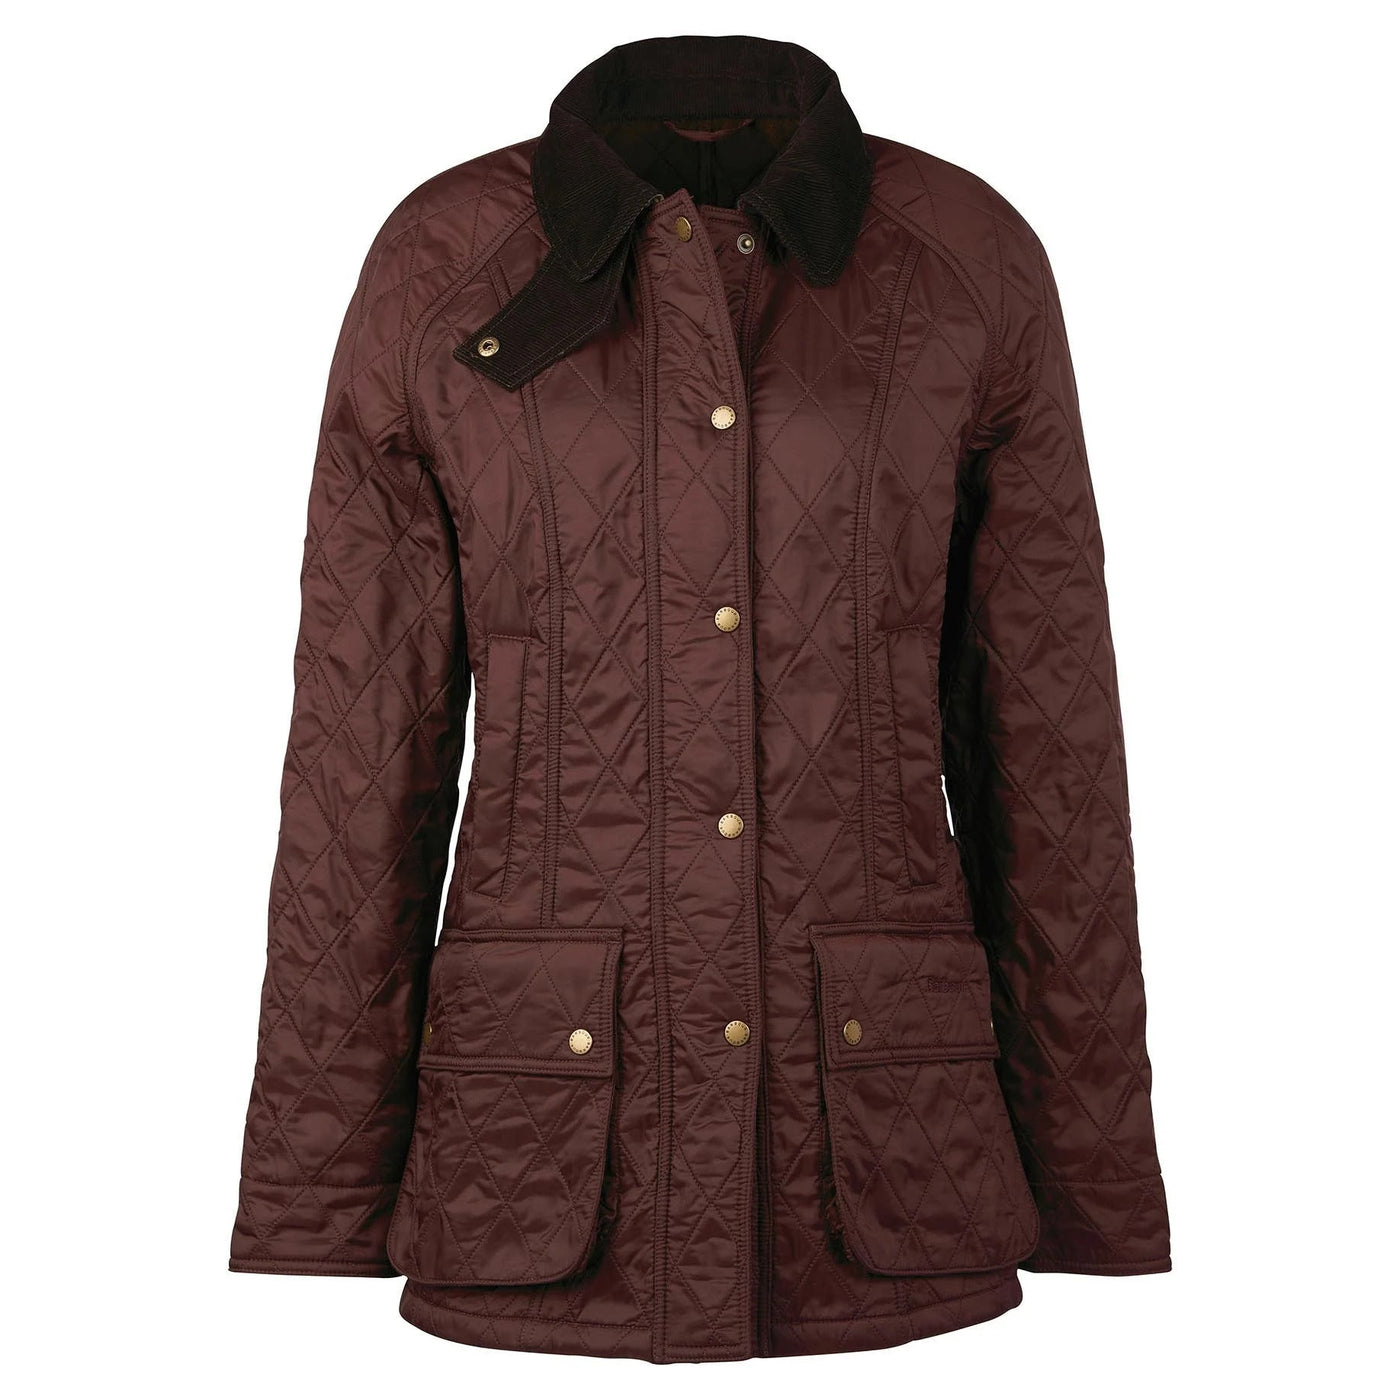 Barbour Women's Beadnell Polarquilt-Women's Clothing-WINDSOR/BROWN-US2/UK6-Kevin's Fine Outdoor Gear & Apparel